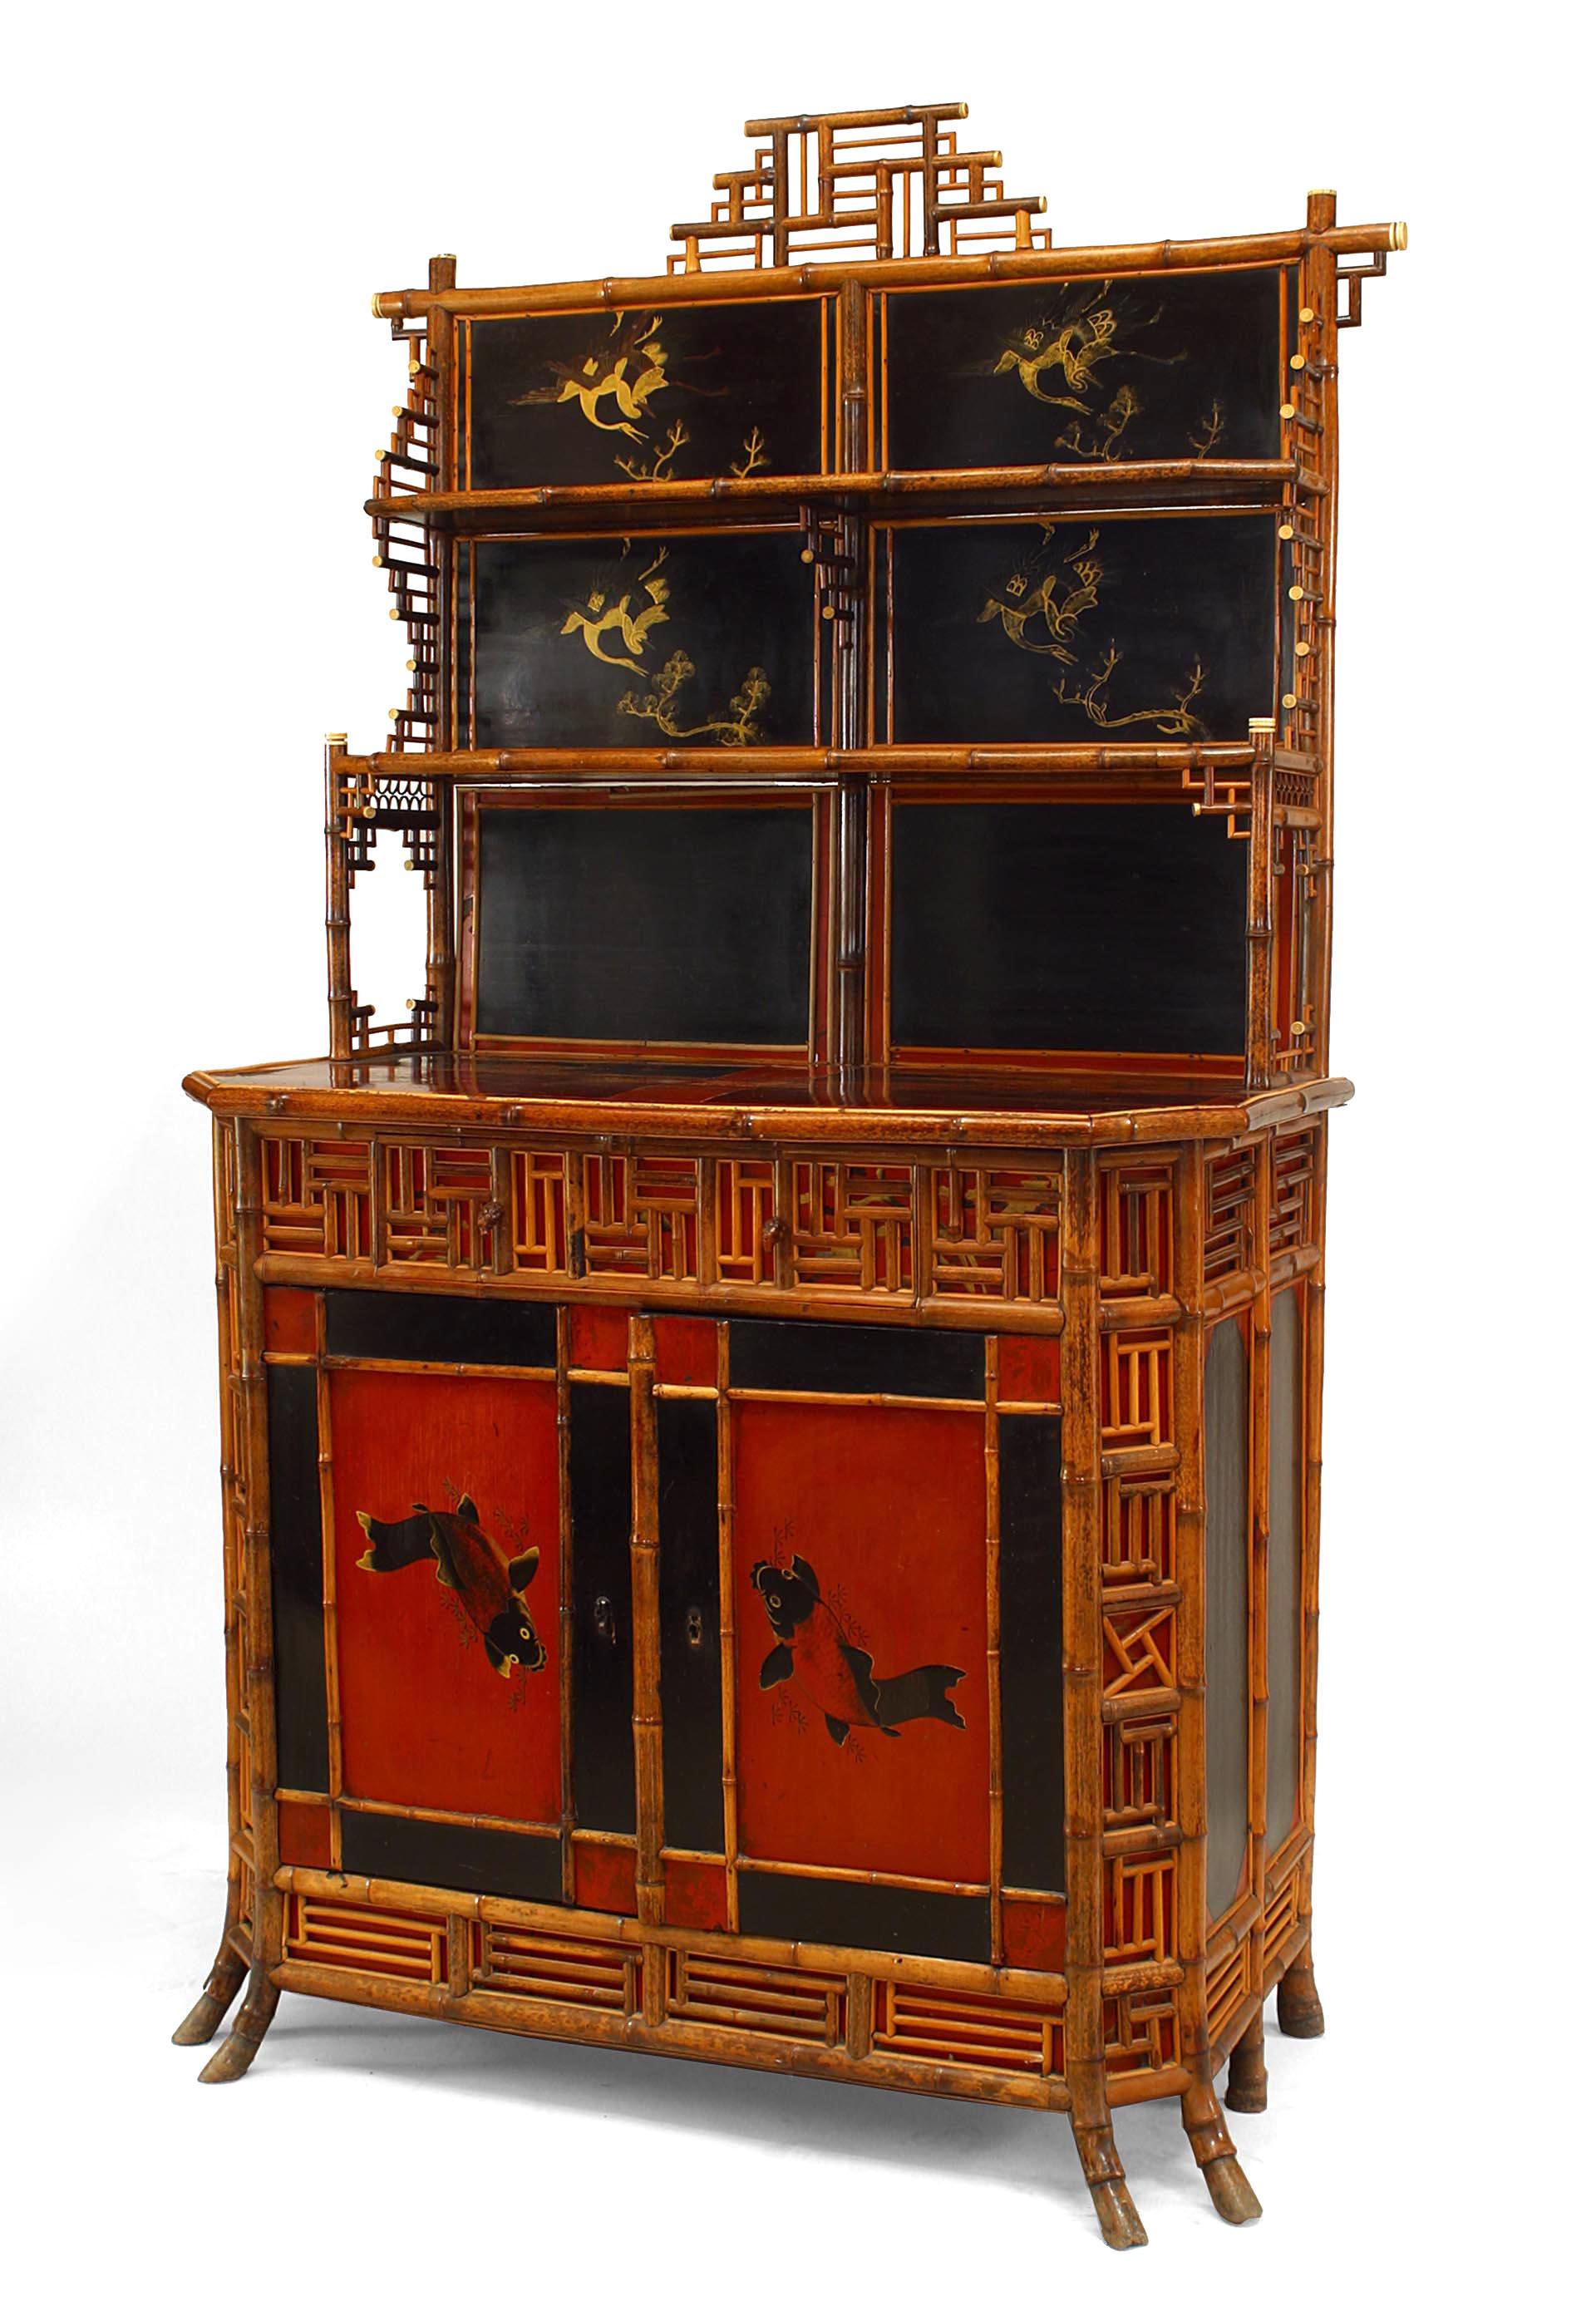 English Regency-style (19th Century) bamboo and lacquered etagere cabinet with inlaid panels on 2 front doors and drawer and detailing.
 